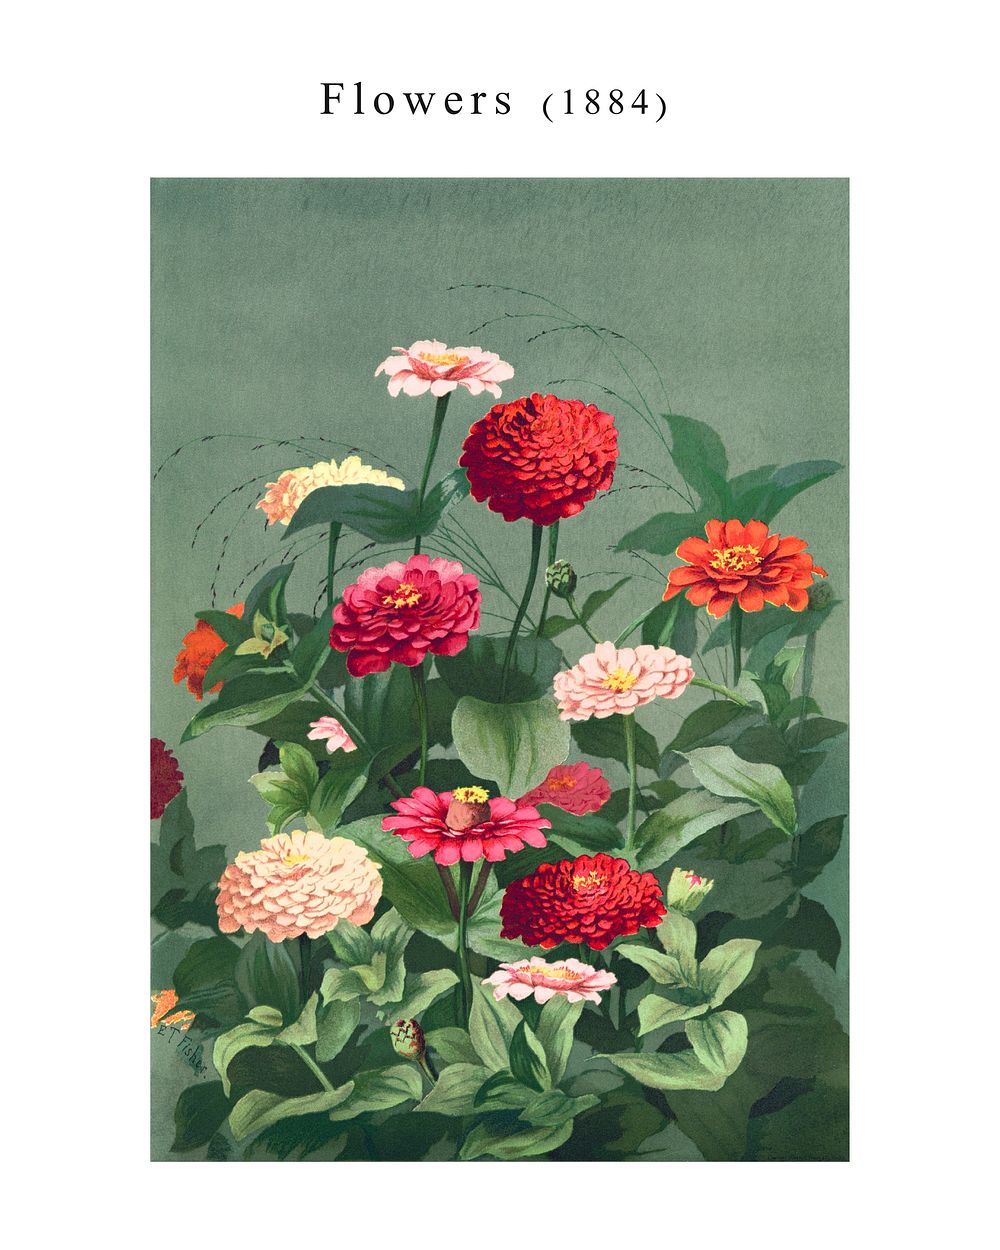 Red flowers wall art, vintage wall decor, painting illustration, enhanced from the artwork of L. Prang & Co